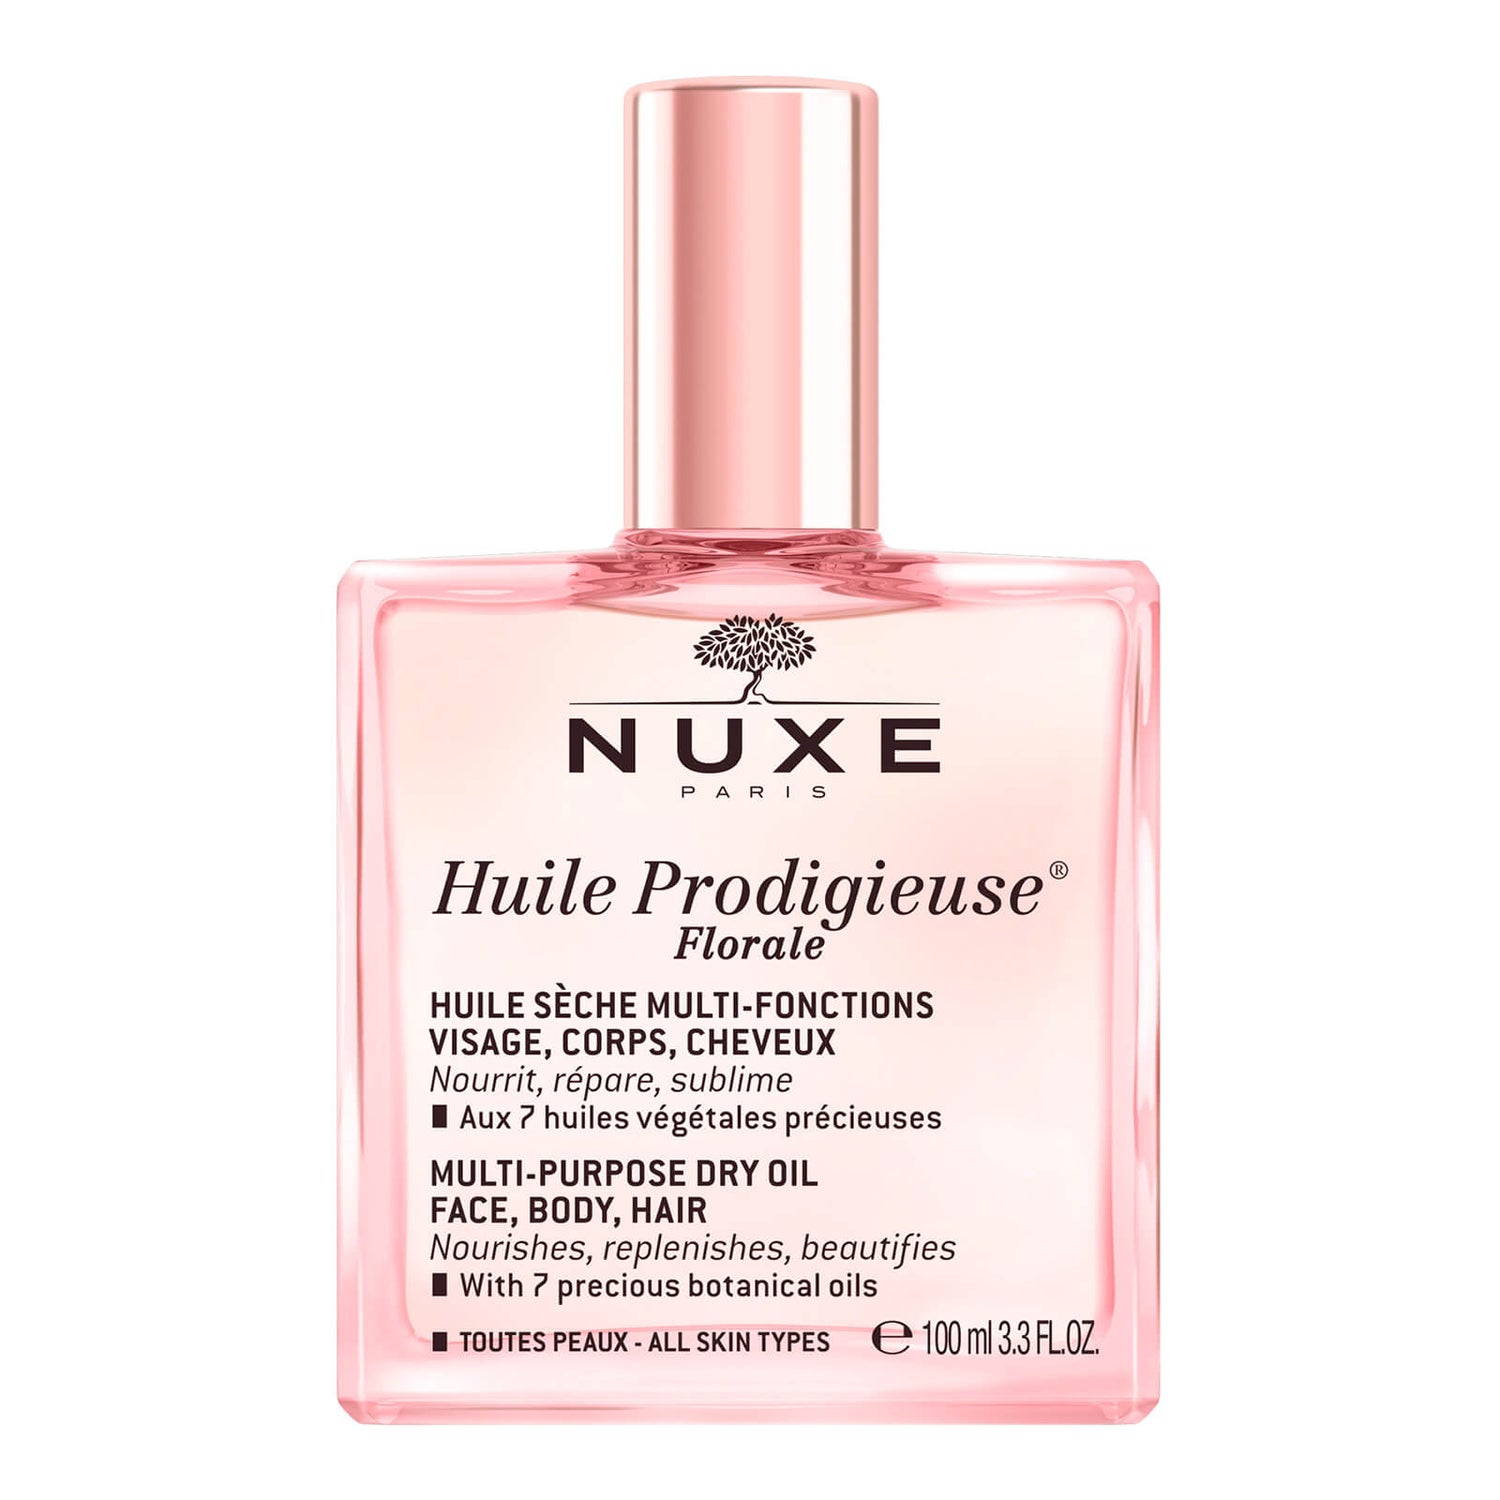 NUXE Huile Prodigieuse Florale Multi-Purpose Dry Oil 100ml FREE Delivery